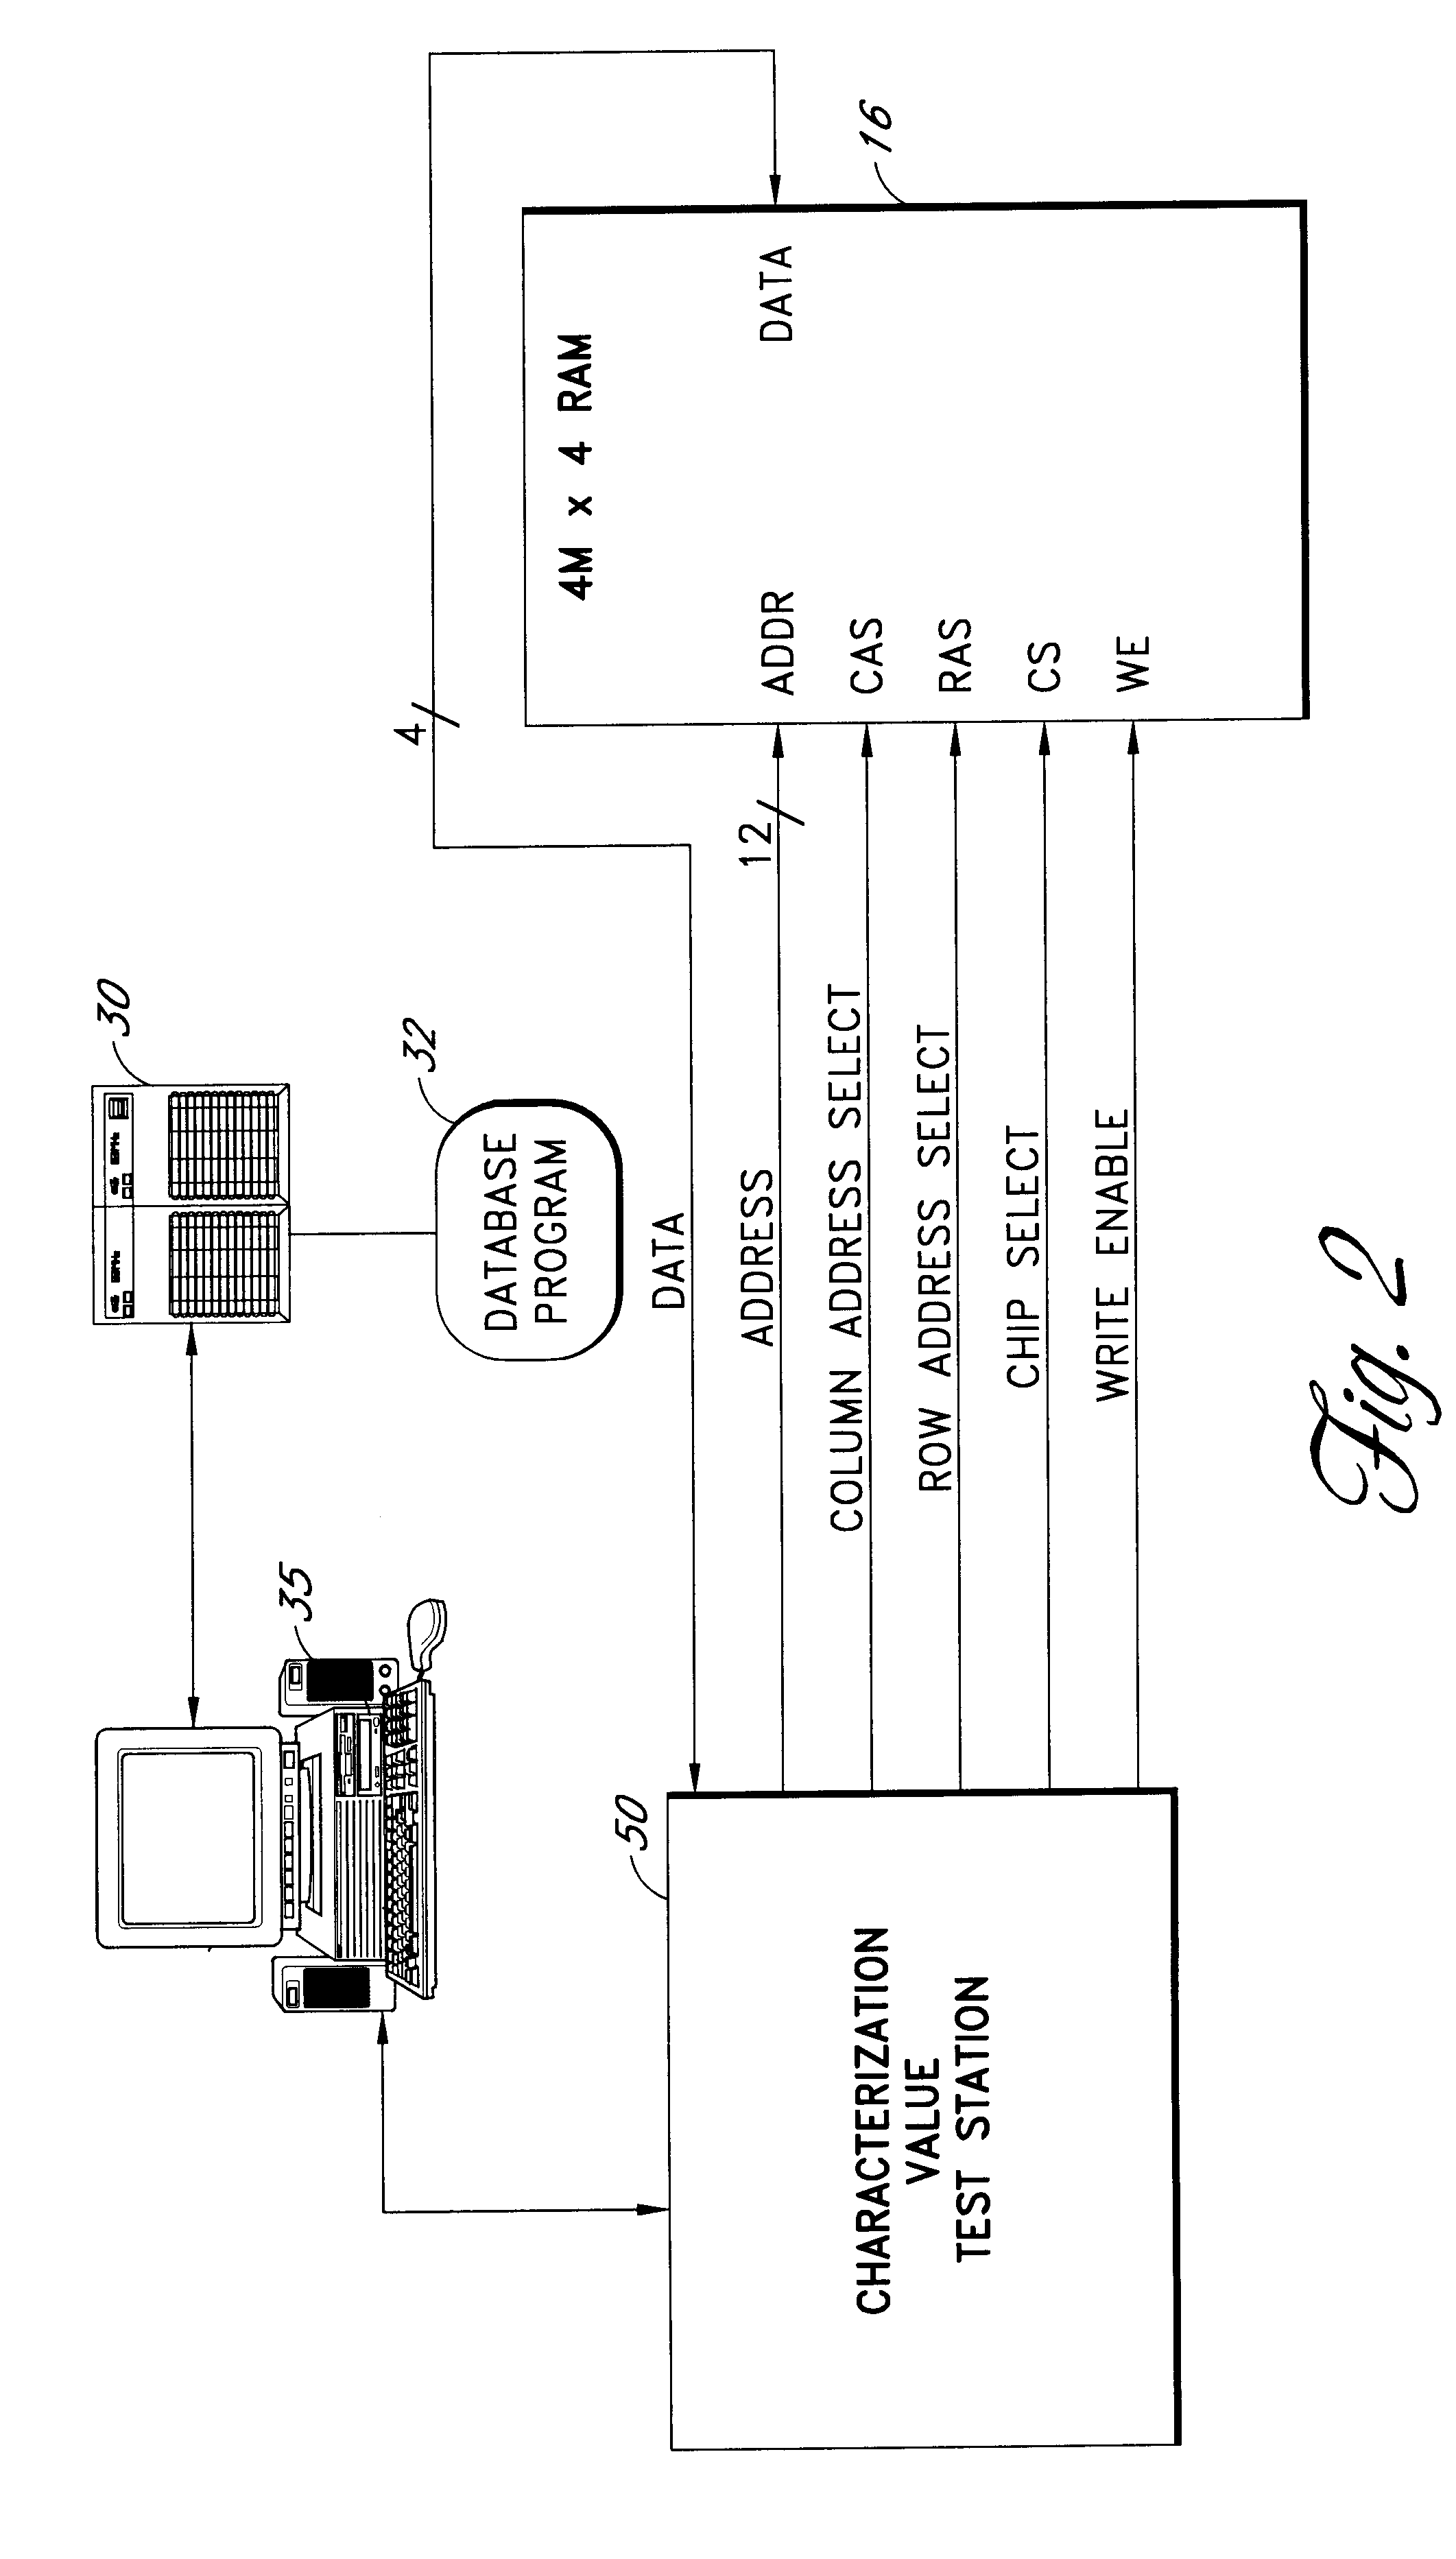 System for identifying a component with physical characterization